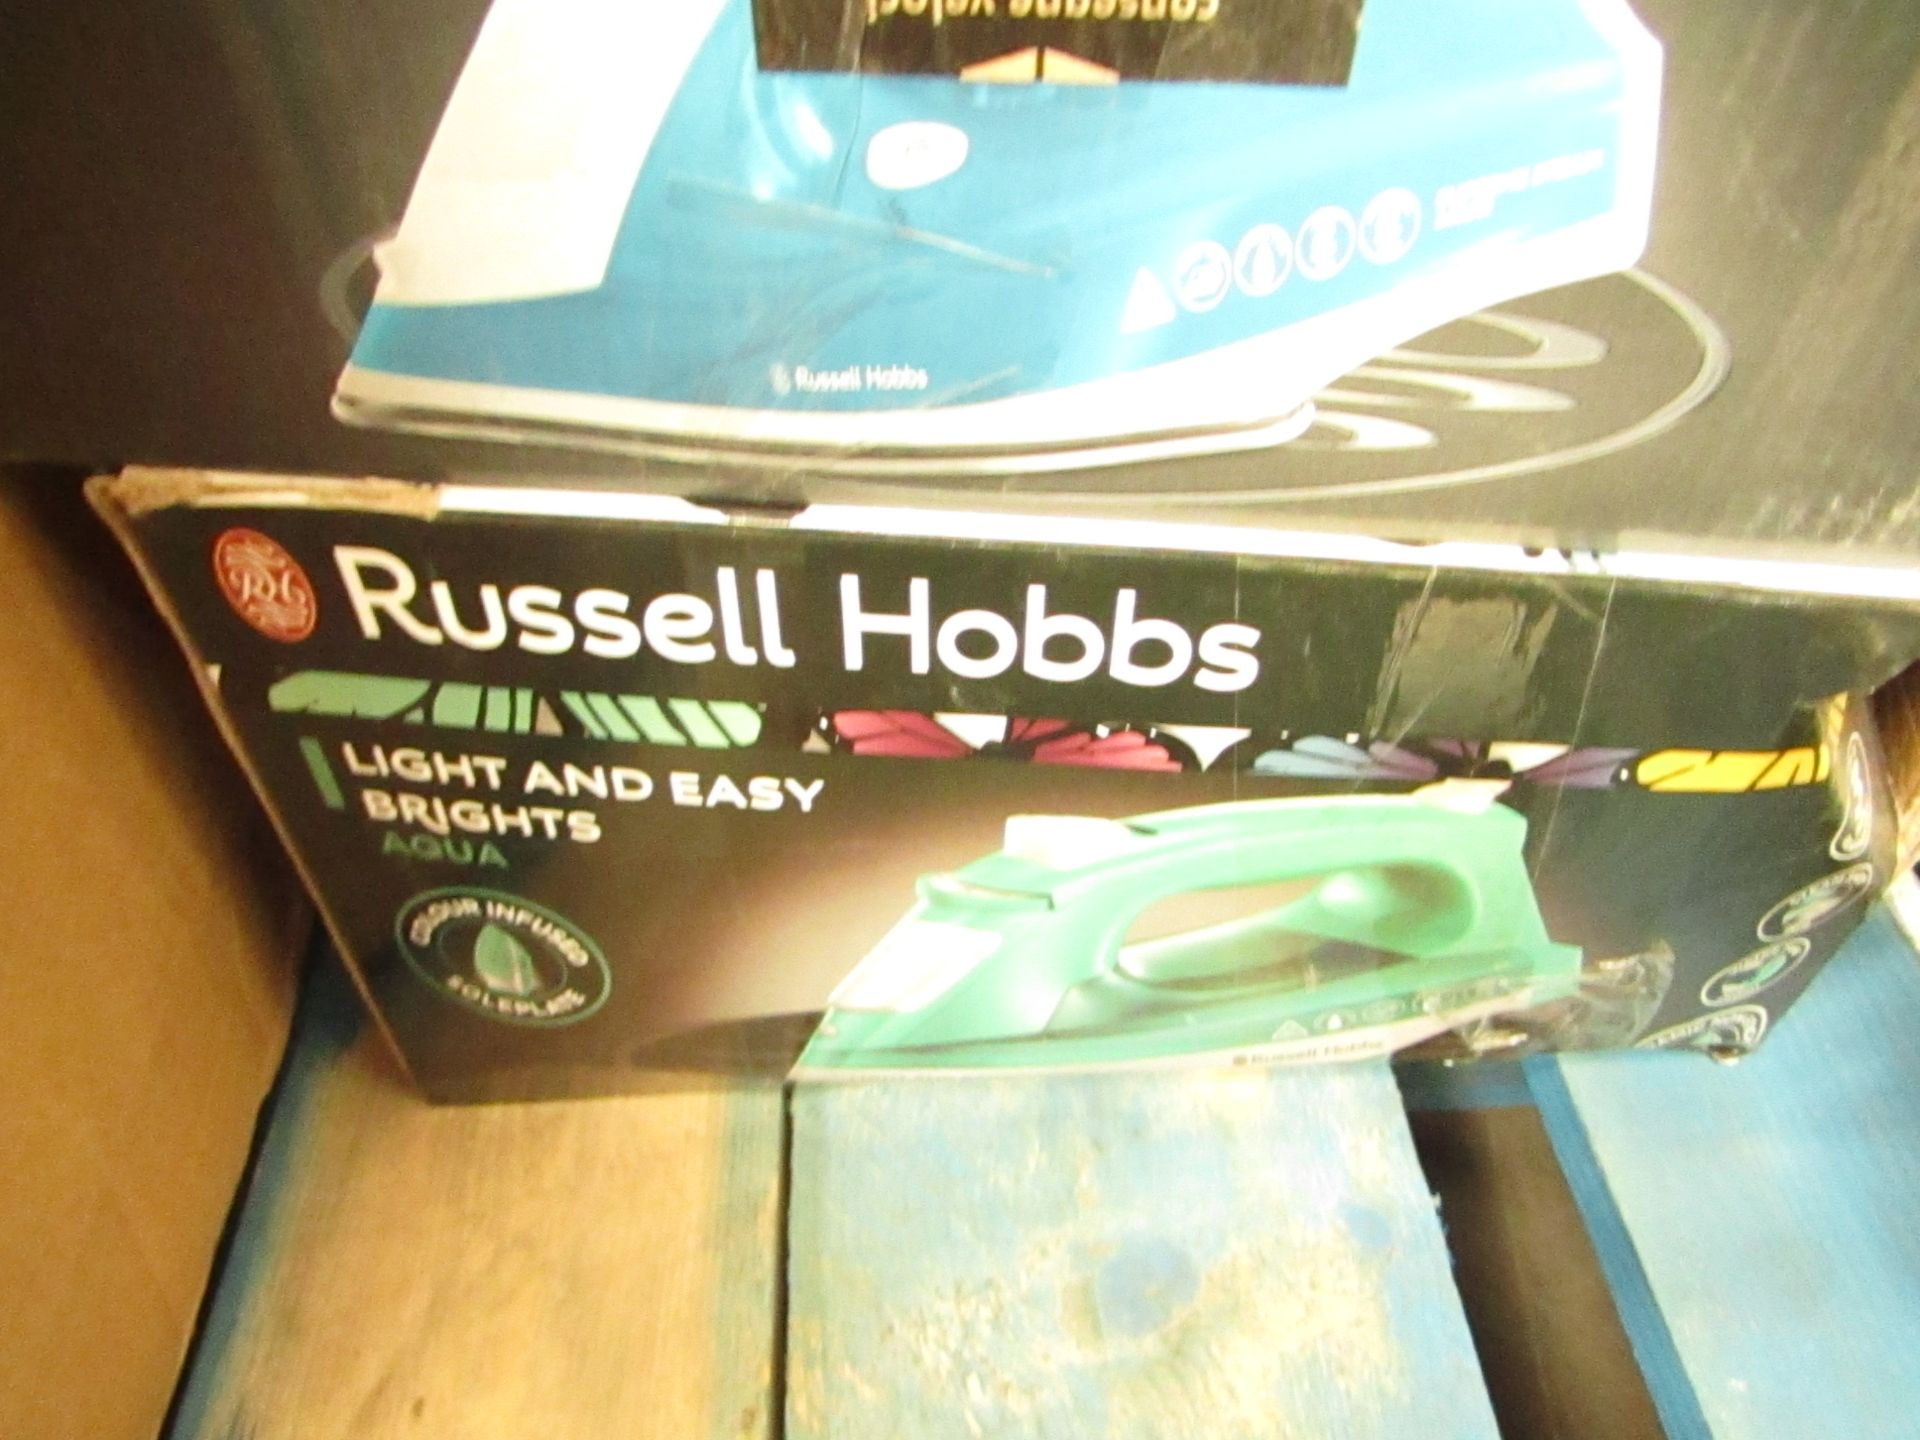 Russell Hobbs Light and Easy Brights steam iron in Aqua, unchecked and boxed.